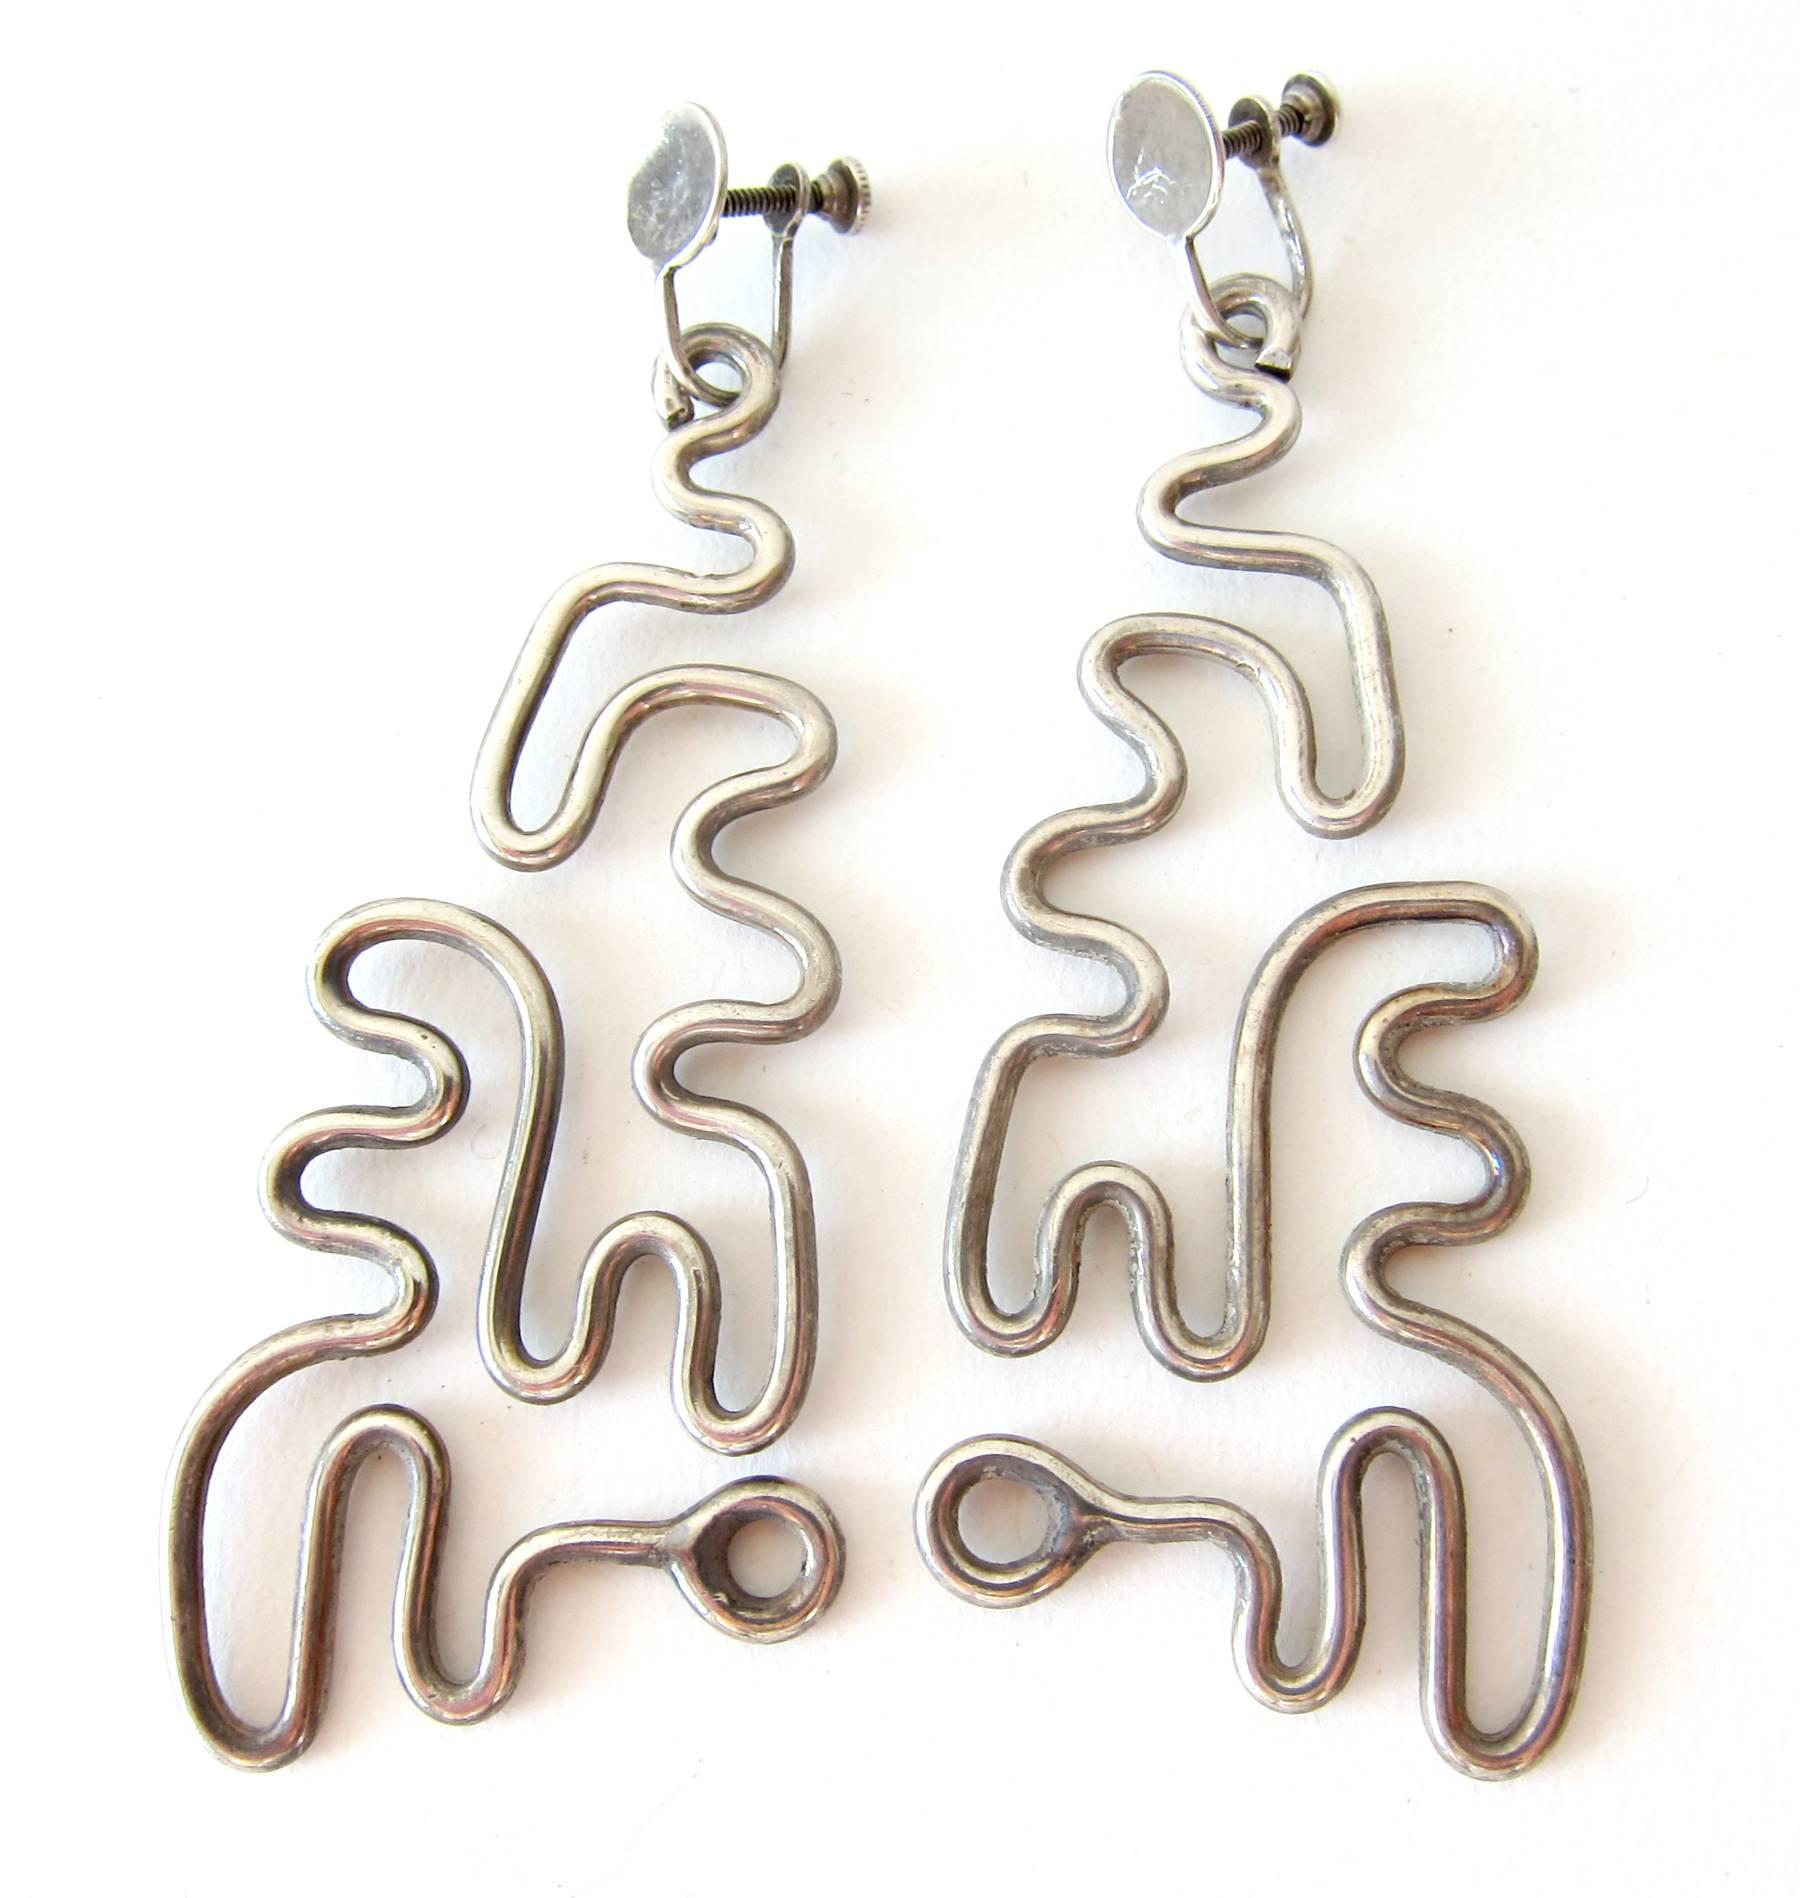 Sterling silver puzzle earrings created by Milton Cavagnaro of Mill Valley, California.  One continual piece of heavy gauge sterling silver makes up these highly creative earrings.  Earrings are of the screw back variety and measure 3.25" by